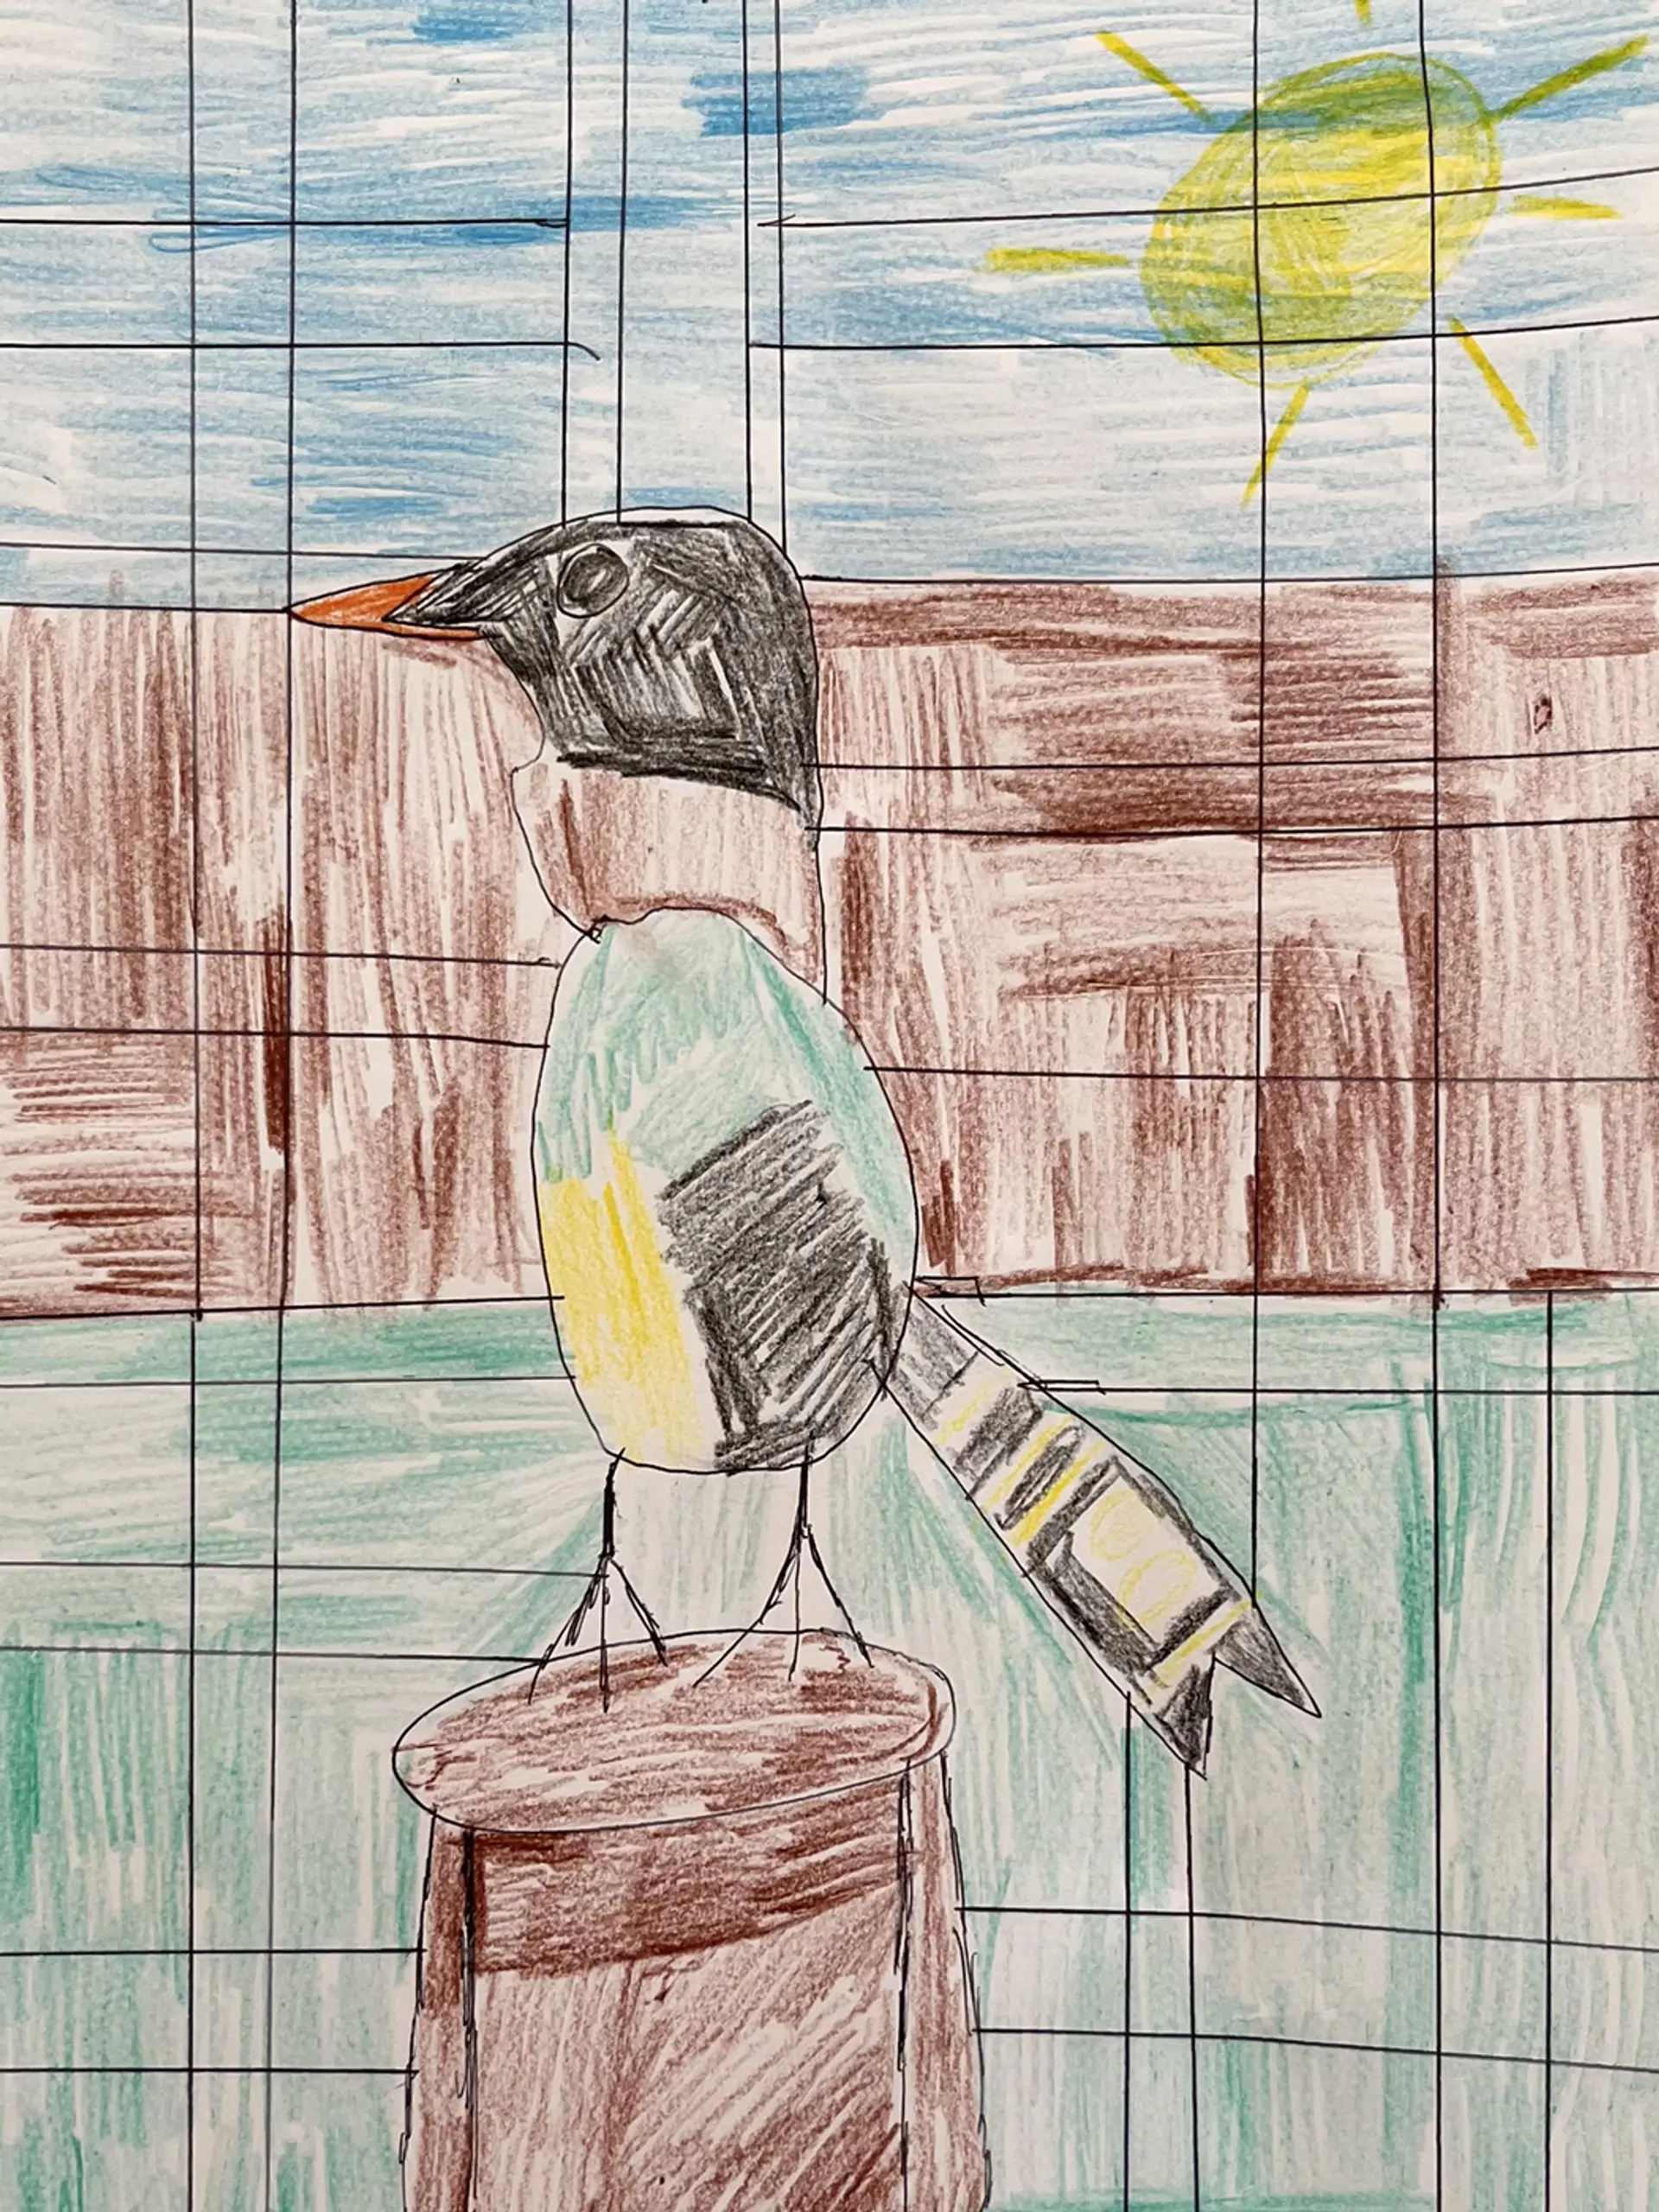 A coloured pencil drawing on a bird with a black head and green and yellow body standing on a wooden post. The background is coloured green, brown and blue and is split into a rectangular grid. There is a yellow sun in the right hand corner of the artwork. 